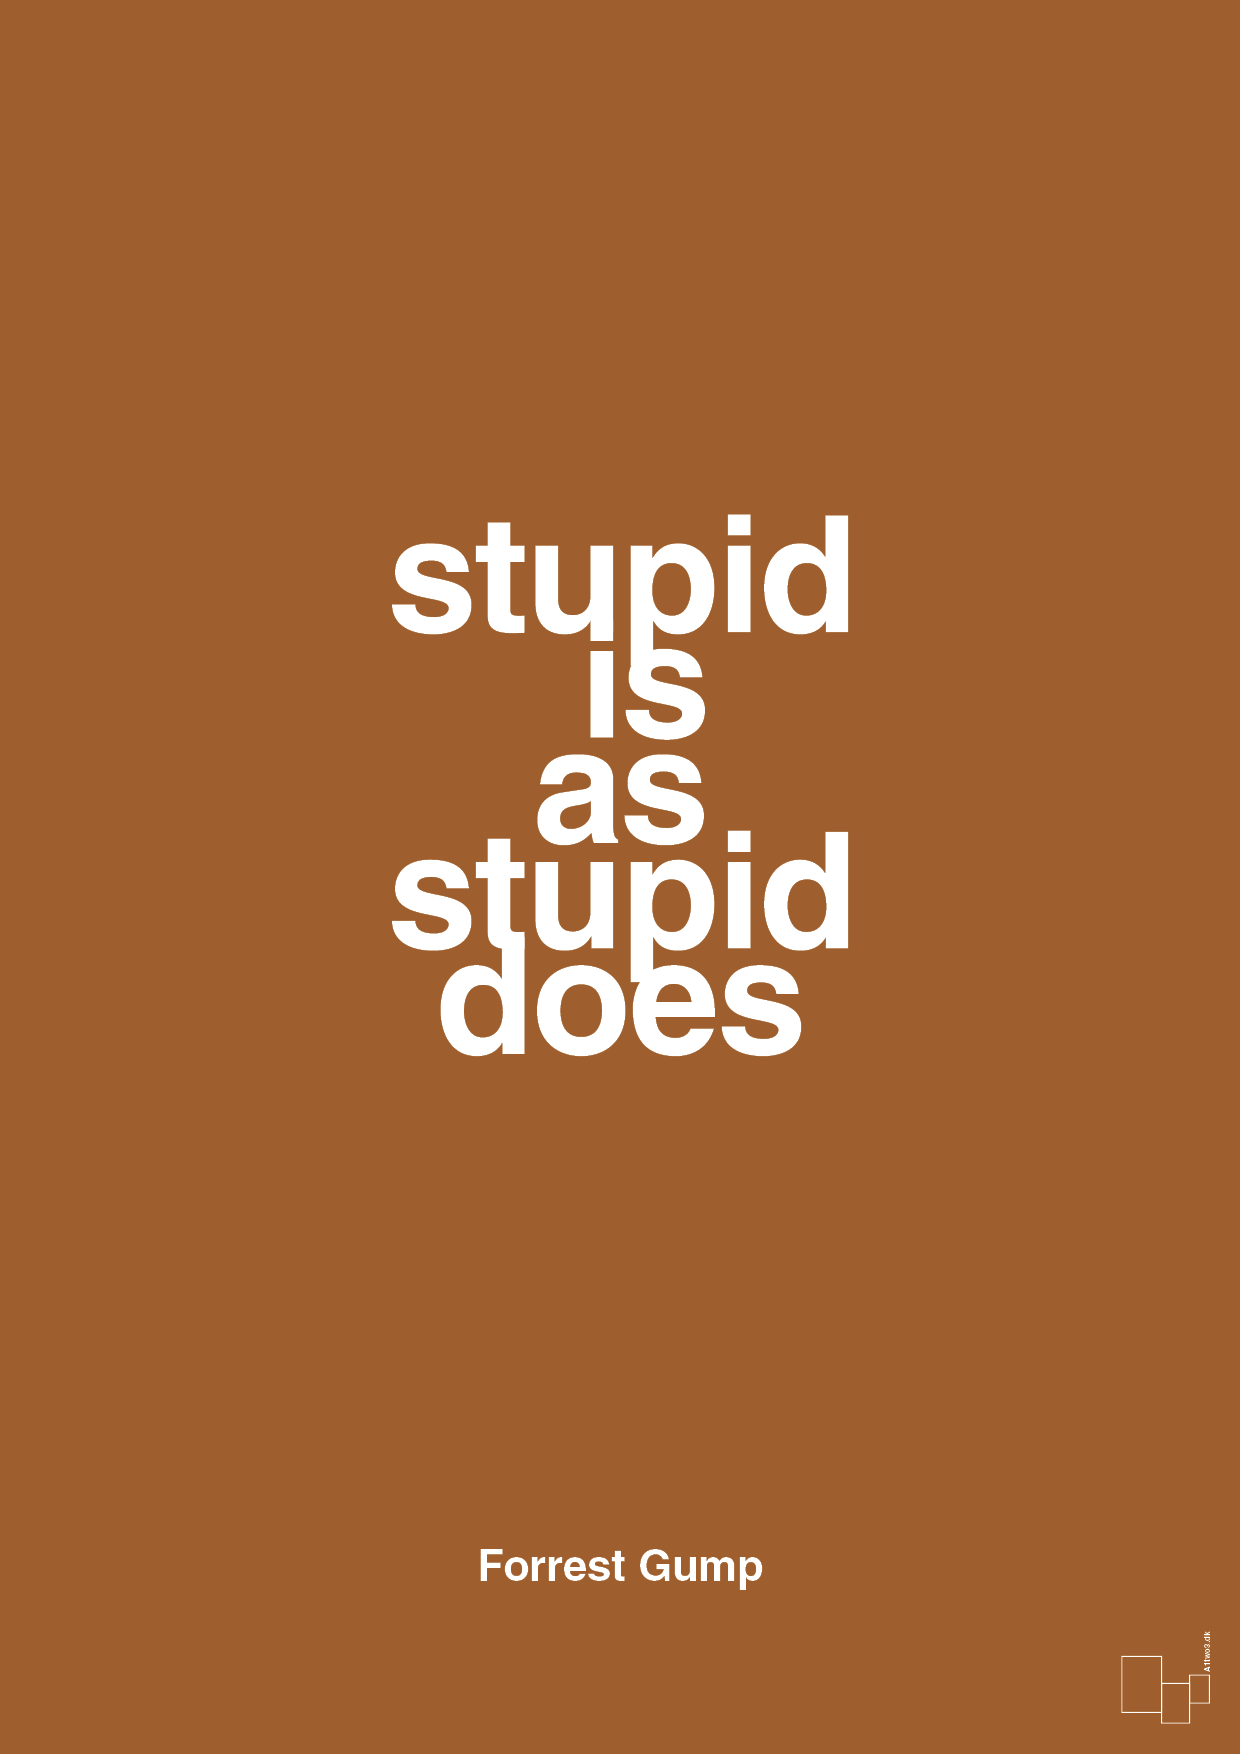 stupid is as stupid does - Plakat med Citater i Cognac